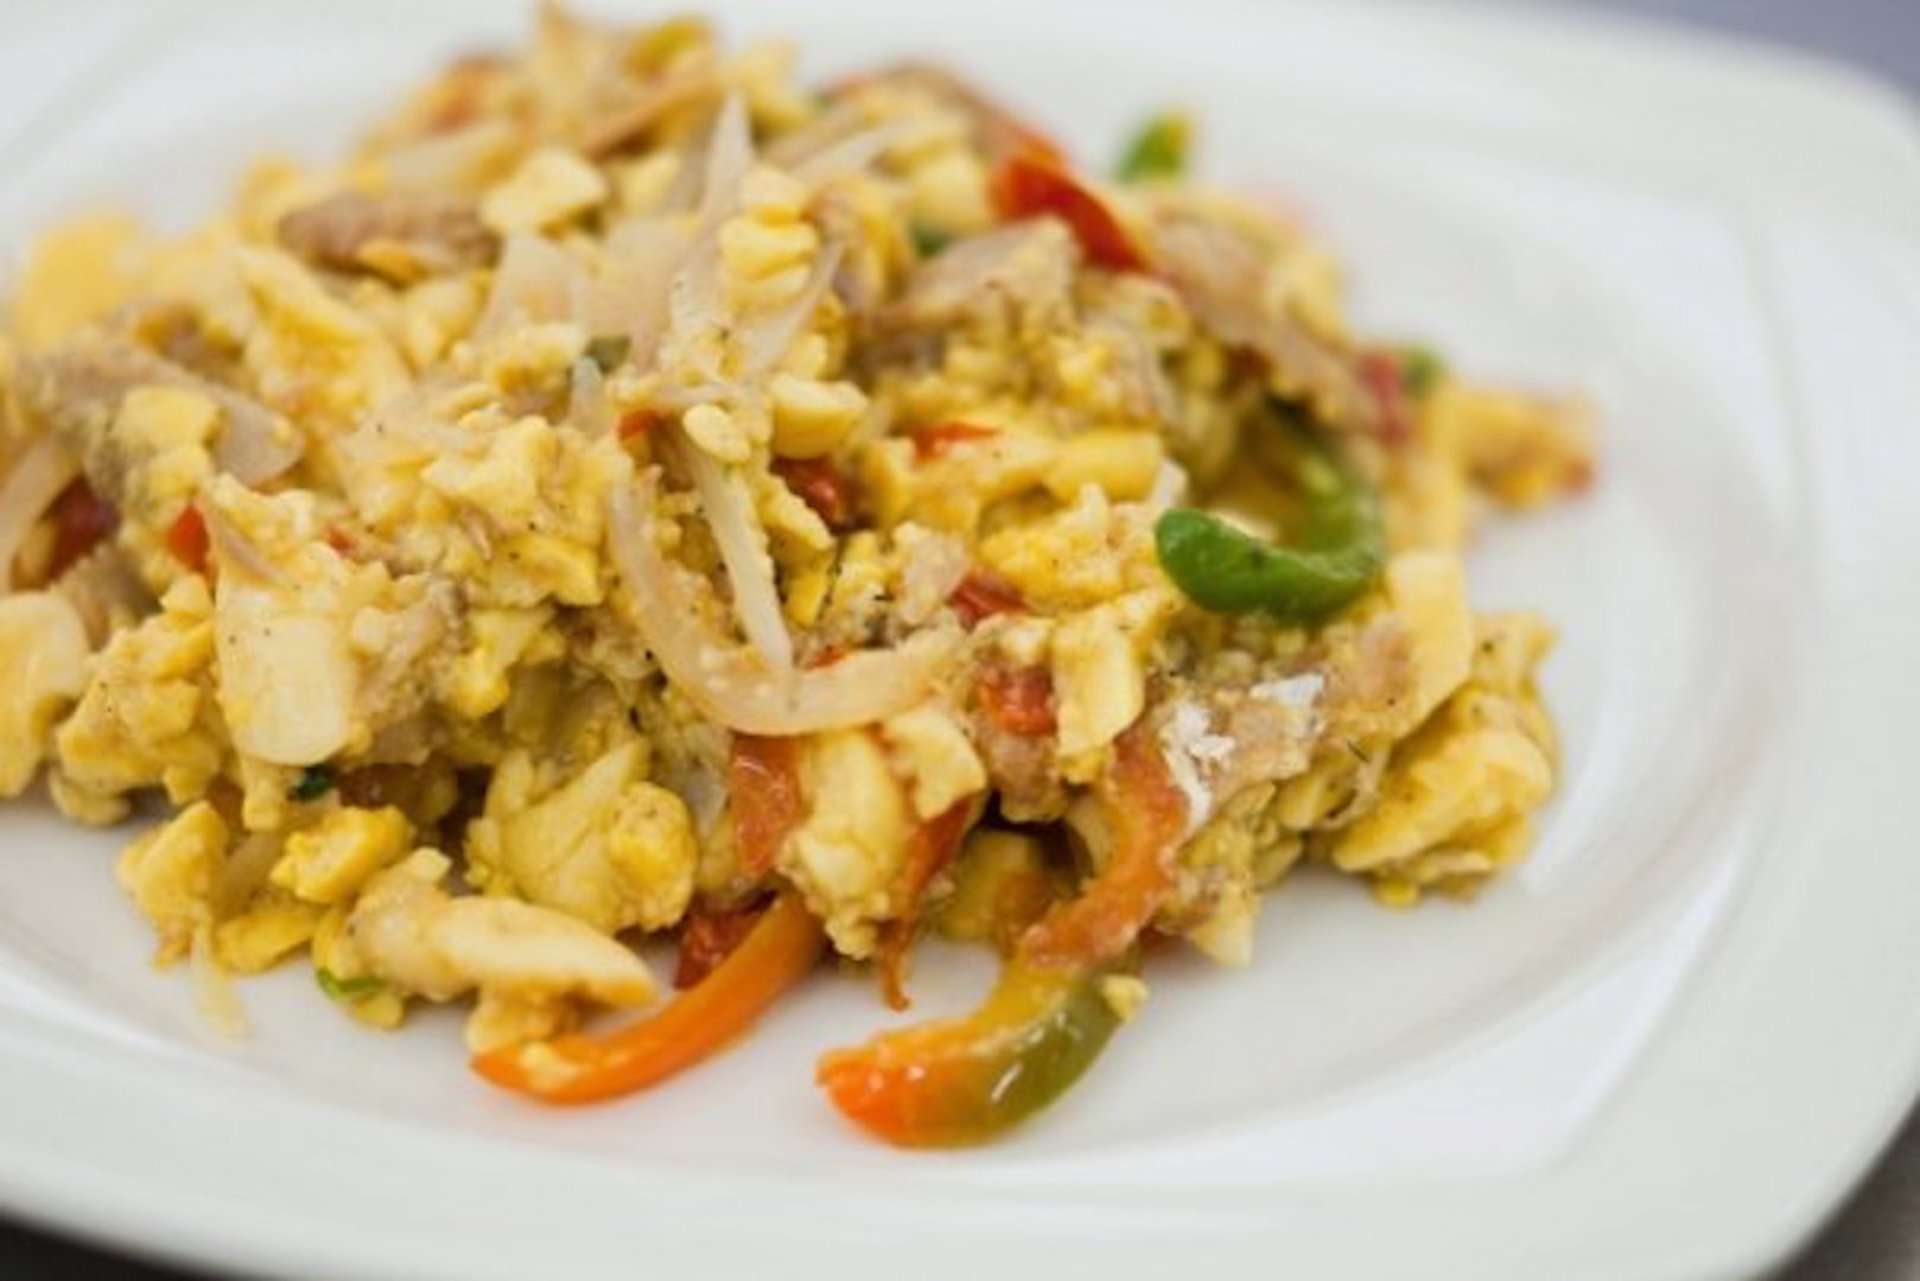 Ackee and Saltfish post by Lill Brothers of Bradford, West Yorkshire established in the year 1855 are wholesale fish merchants, one of the oldest trading businesses in Bradford.